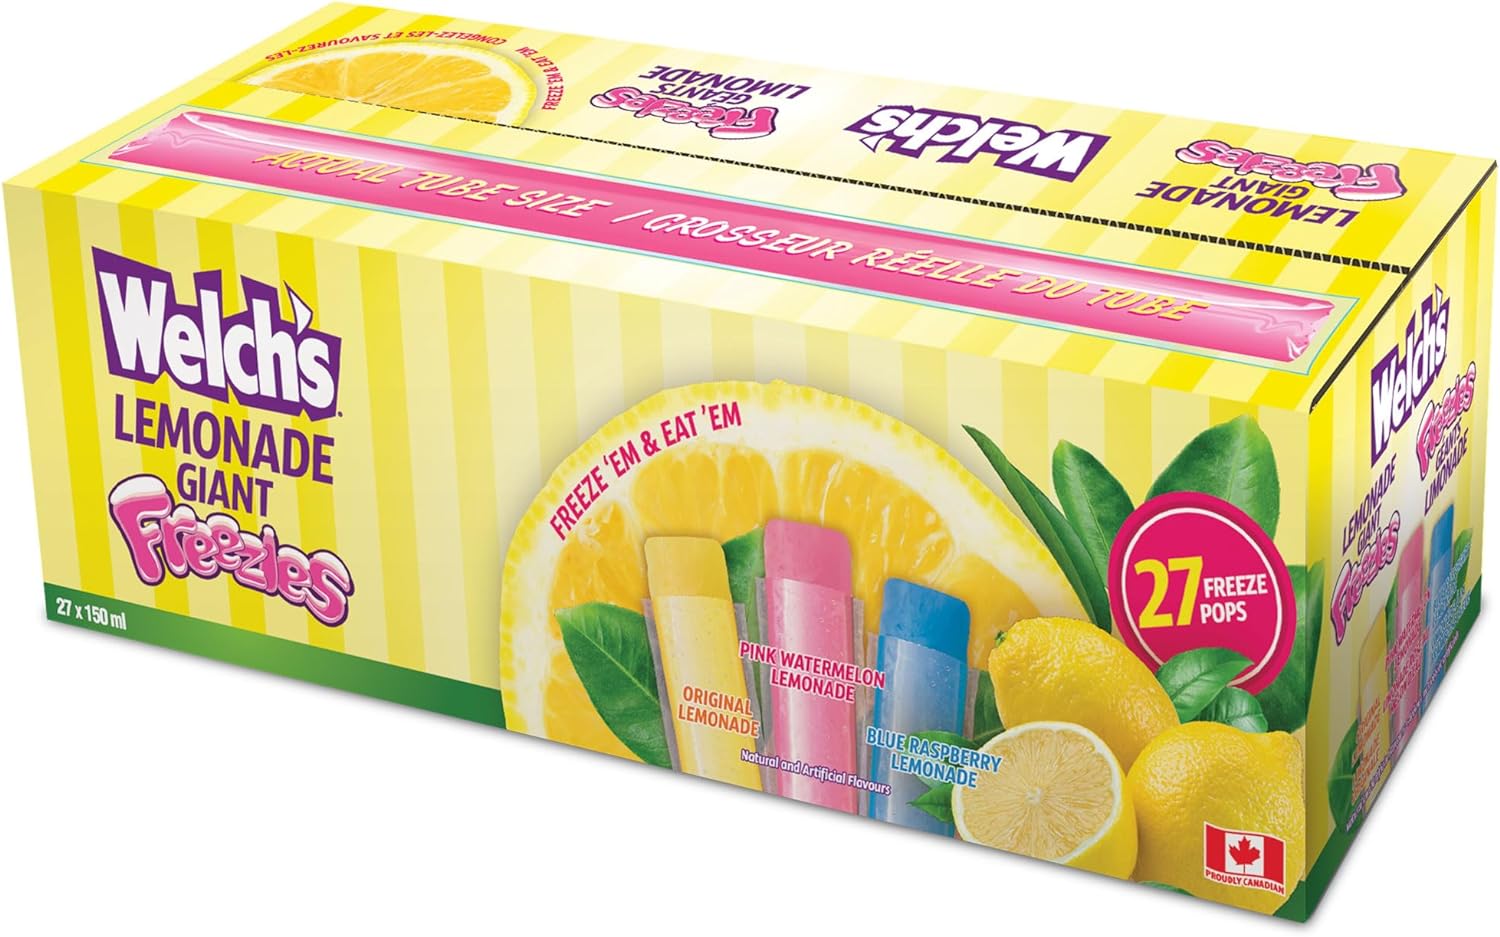 Welch's Lemonade Giant Freezies 27 x 150ml Box front